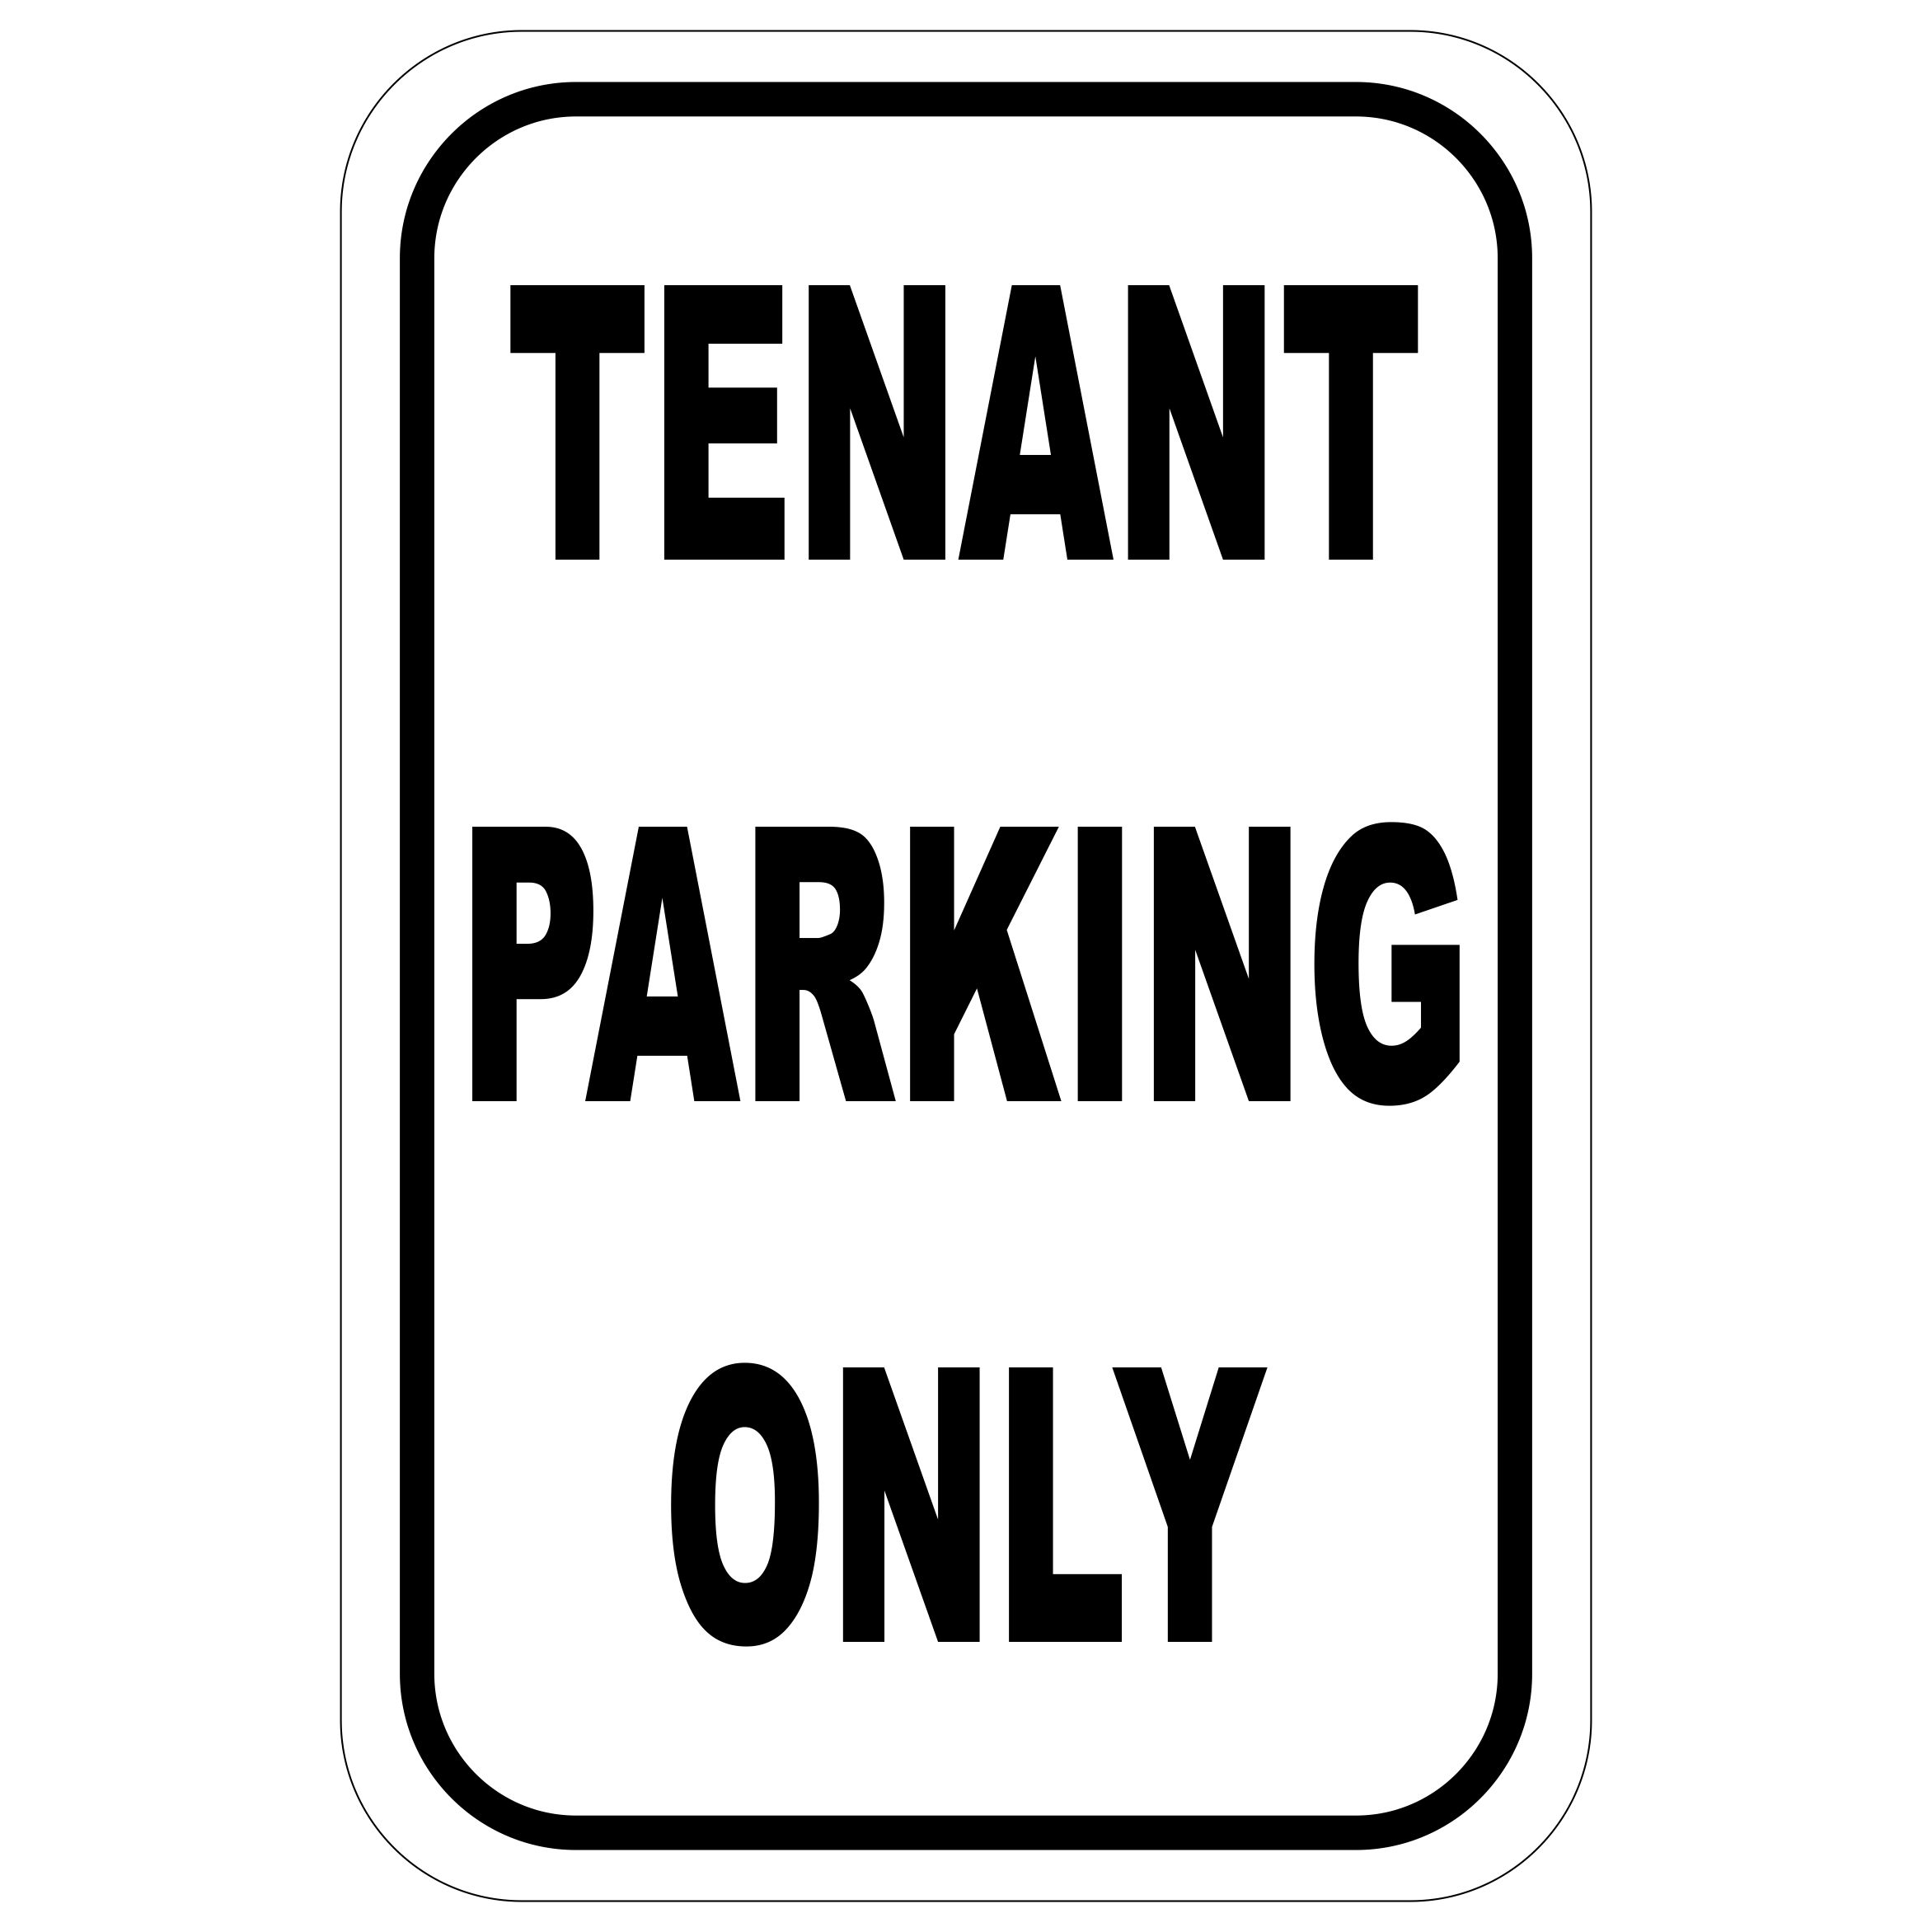 TENANT PARKING ONLY Sign Durable Aluminum NO RUST WEATHER PROOF 